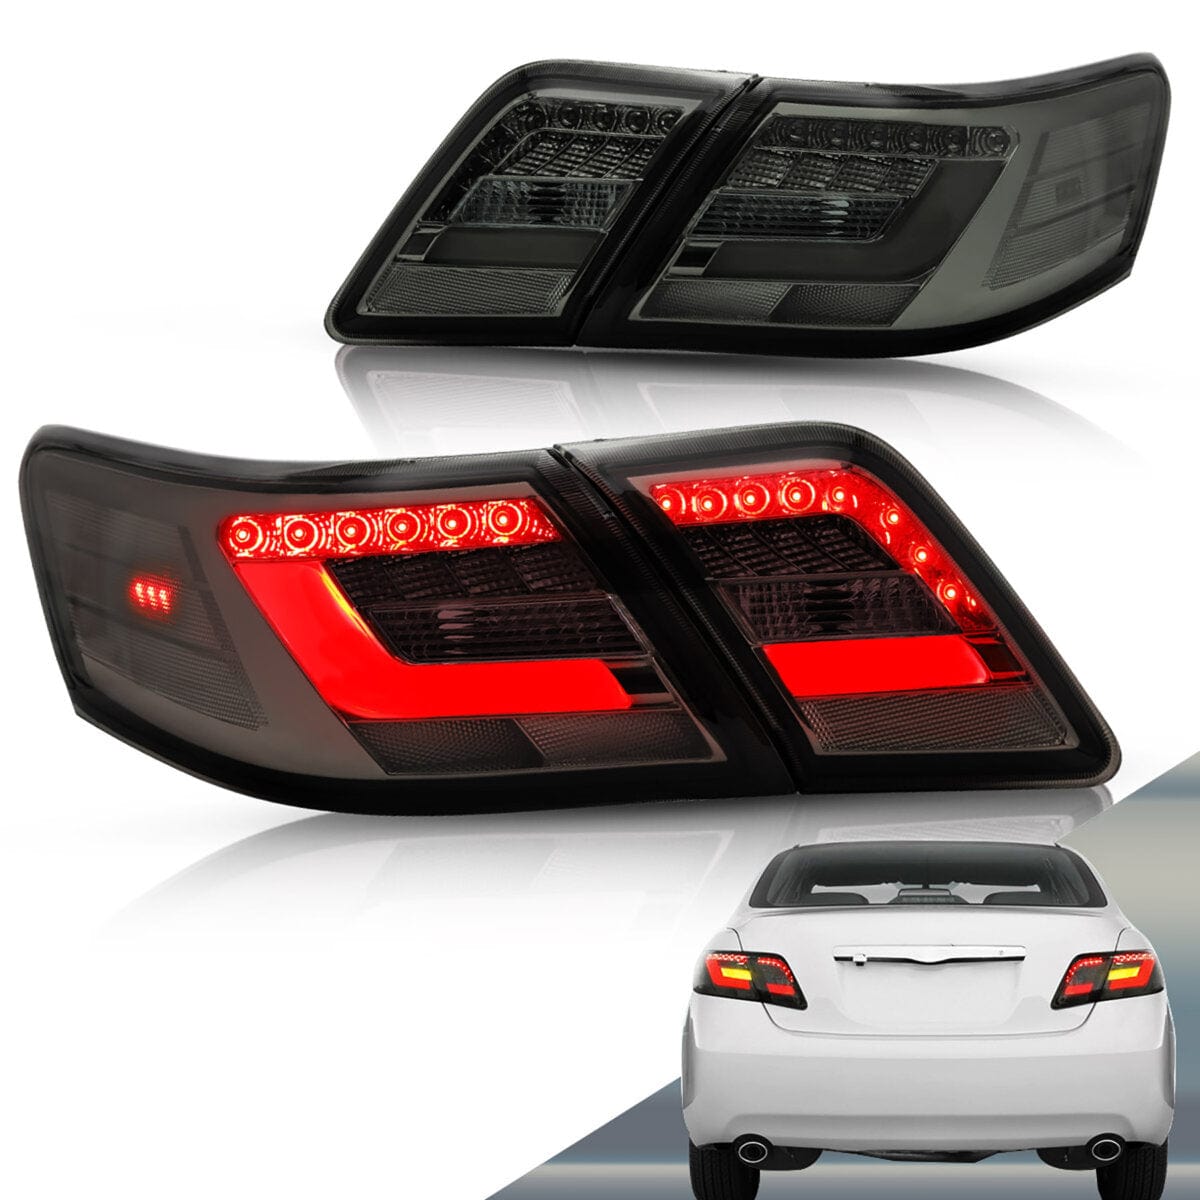 2006-2011 TOYOTA CAMRY Tail Lights - RGB Halo Kits Multicolor Flow Series Color Chasing RGBWA LED headlight kit Oracle Lighting Trendz OneUpLighting Morimoto theretrofitsource AutoLEDTech Diode Dynamics